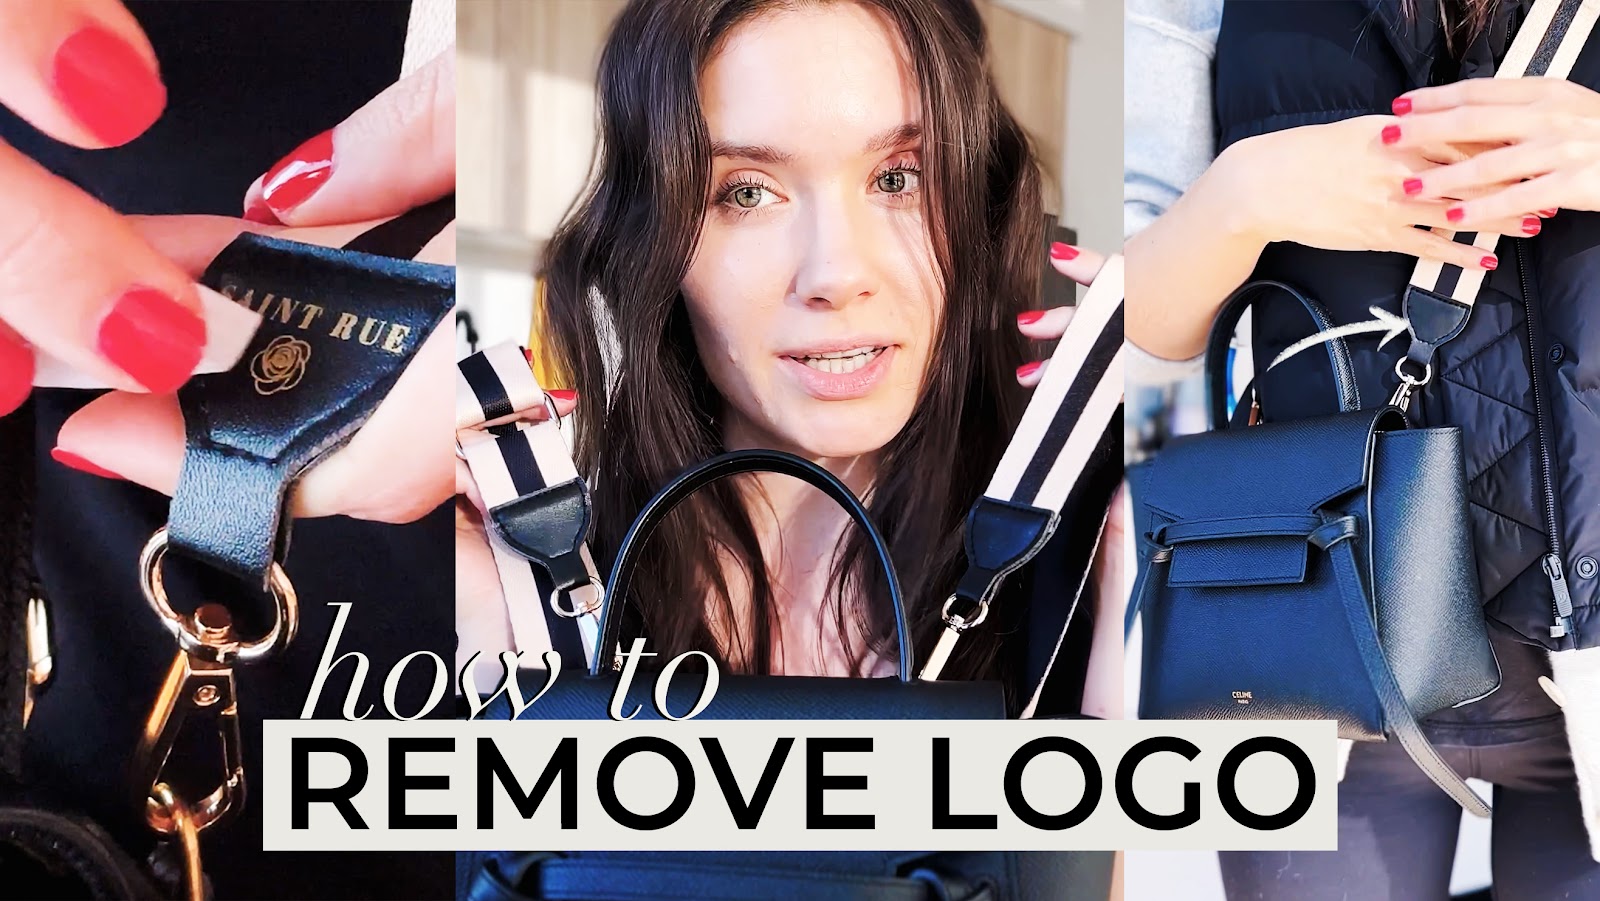 julia caban: How To Remove Logo Printed Initials From Leather Bag